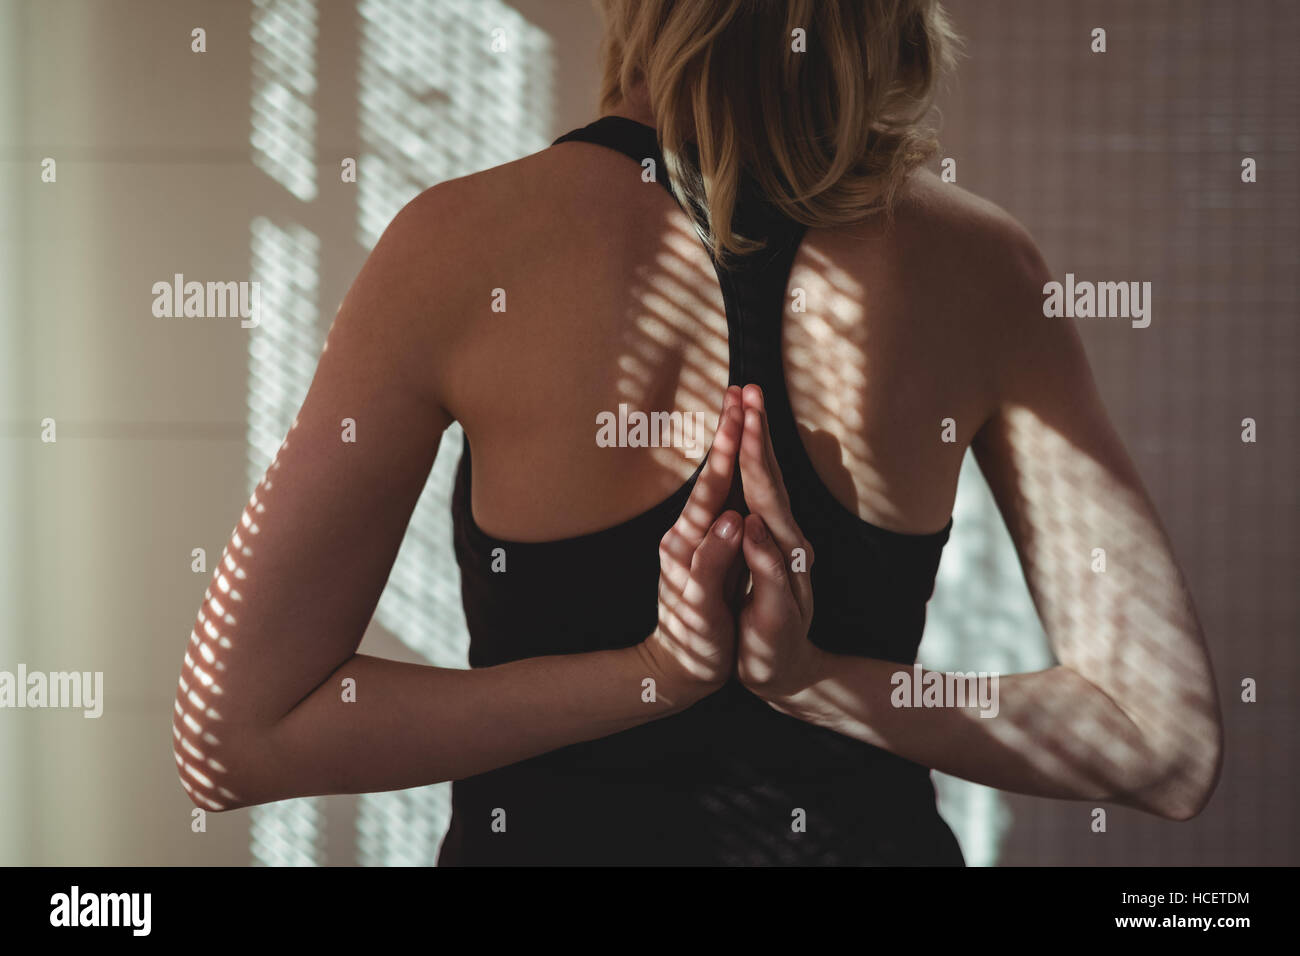 Rear view of woman practicing yoga Stock Photo